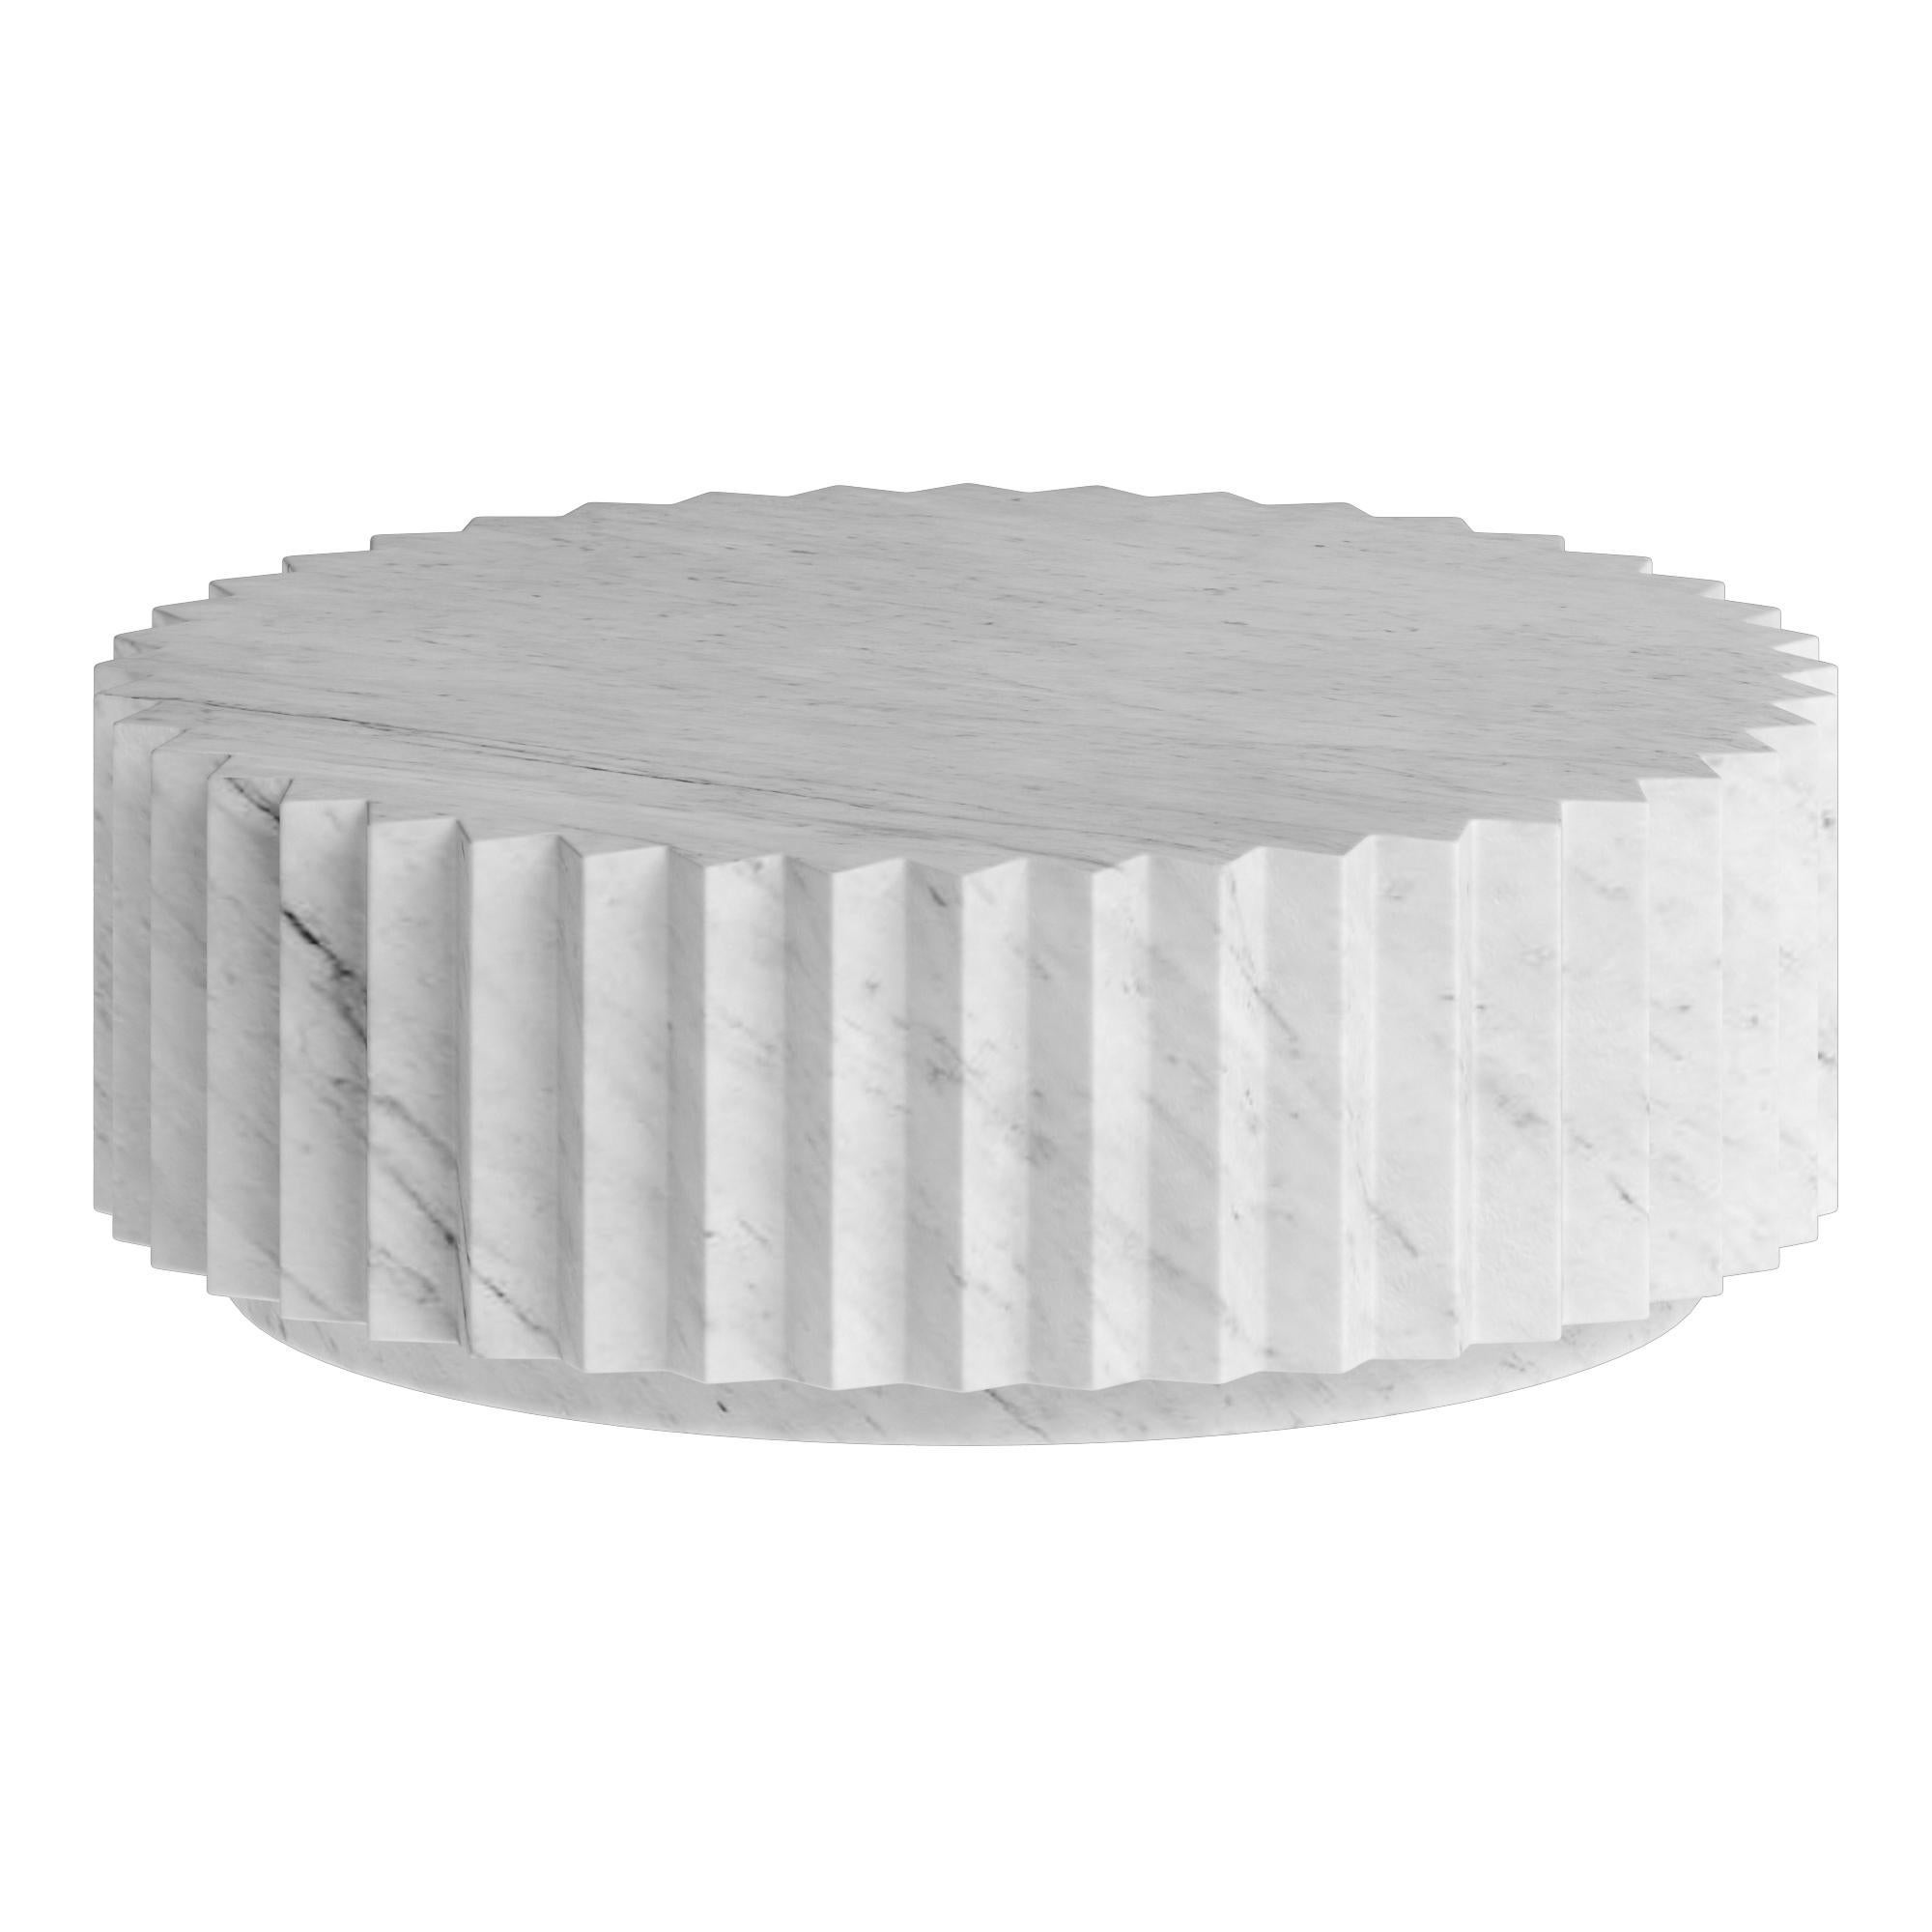 Doris Multifaceted Coffee Table in White Carrara Marble by Fred&Juul